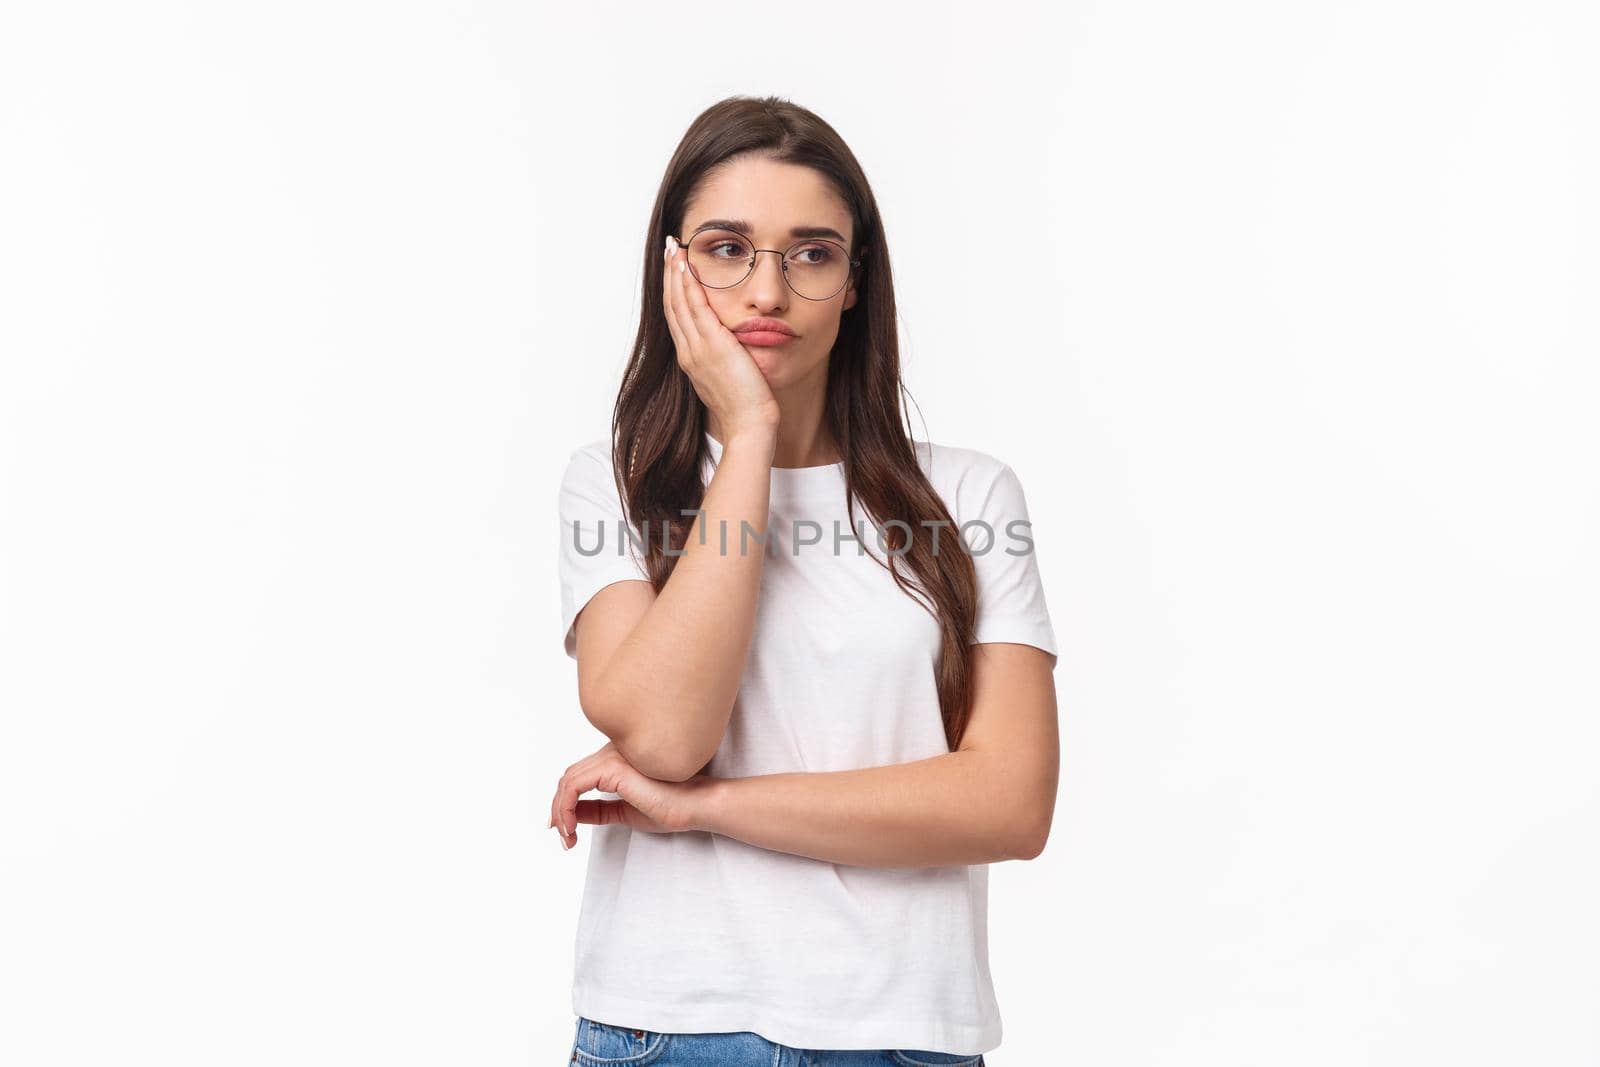 Portrait of bored and uninterested young reluctant girl, listening to boring talks, feel annoyed and unimpressed, lean on palm gloomy looking away, dream be anywhere else, white background.